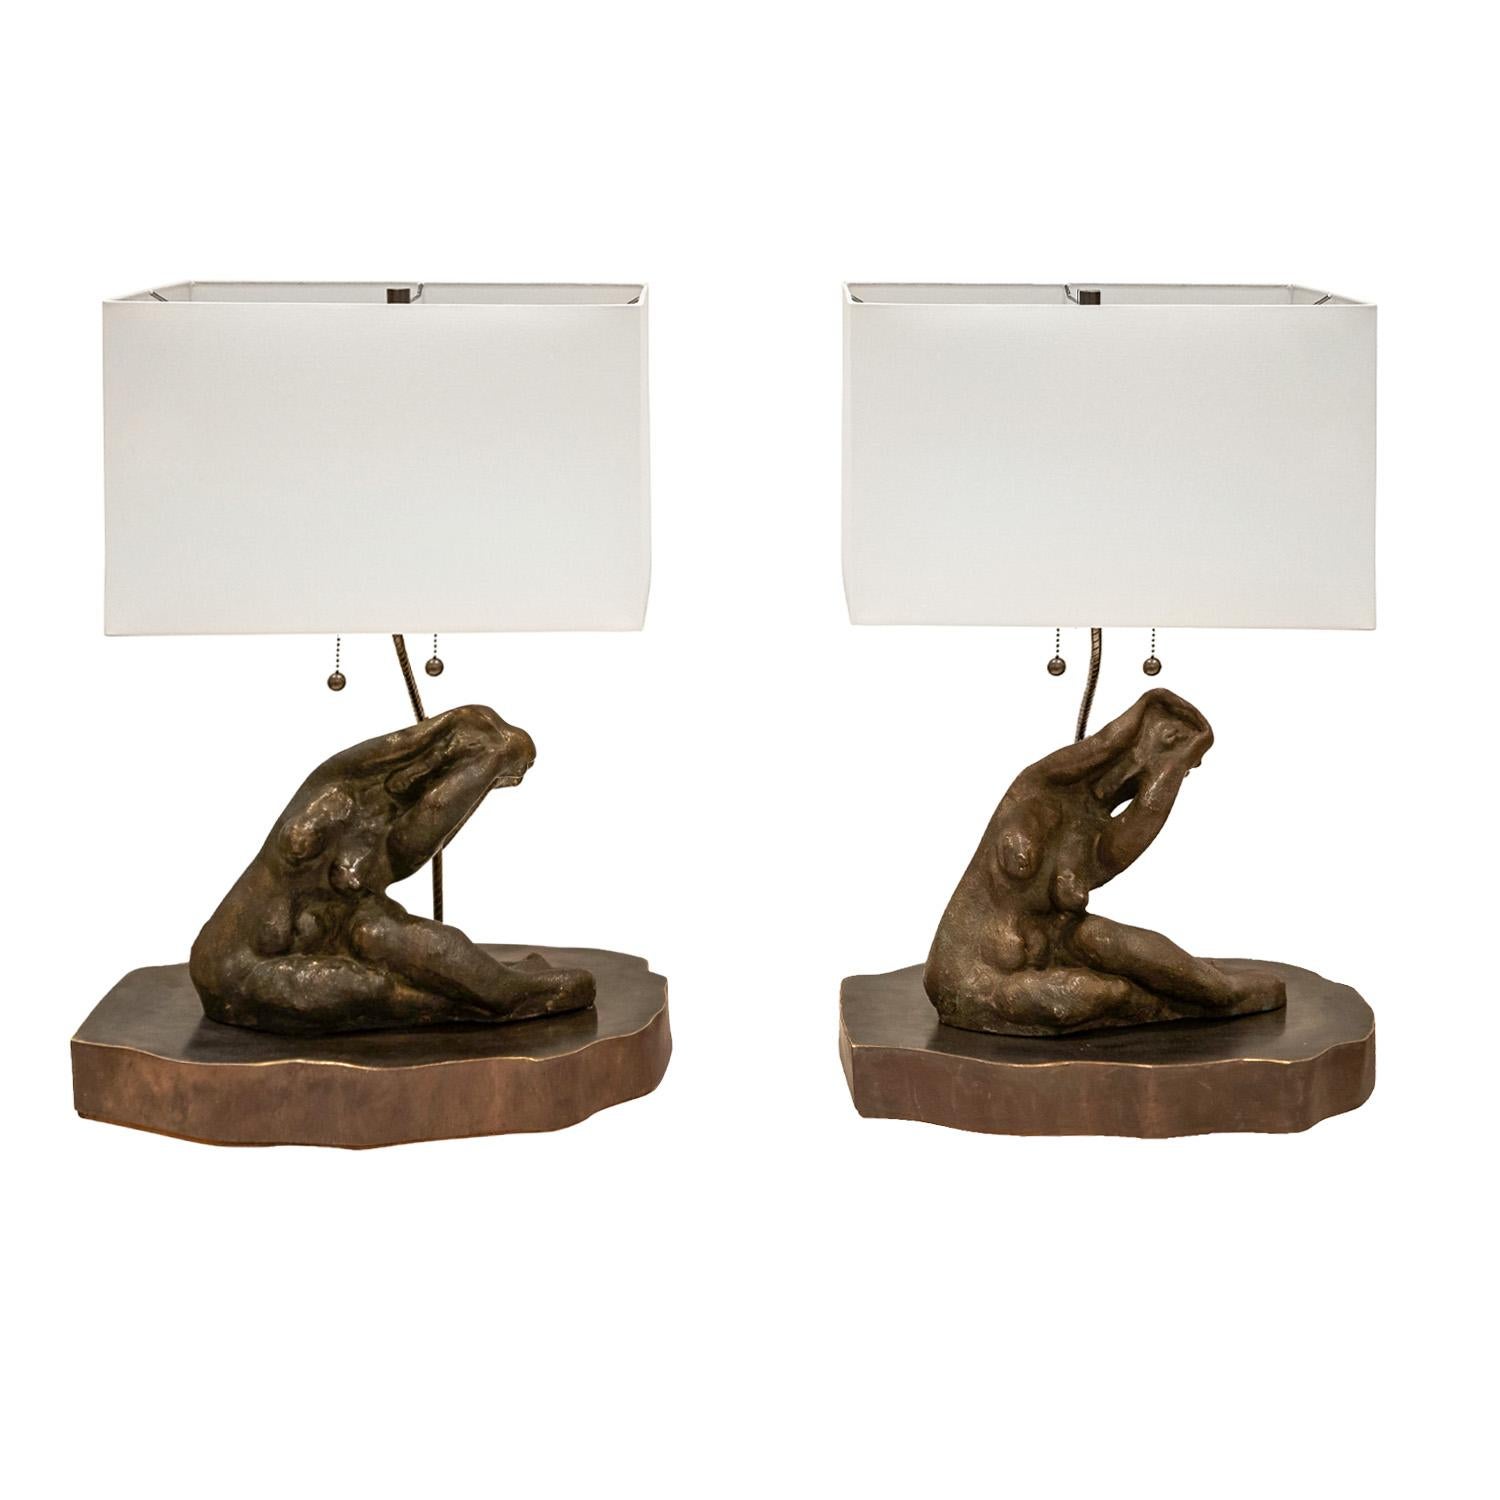 Pair of one-of-a-kind Galatea Table Lamps in bronze on patinated bronze bases, by Philip and Kelvin LaVerne, American 1970's (signed “P.K. LaVerne” on back of each base, as well as “Philip Kelvin LaVerne” on one of the sculptures’ legs).  The female